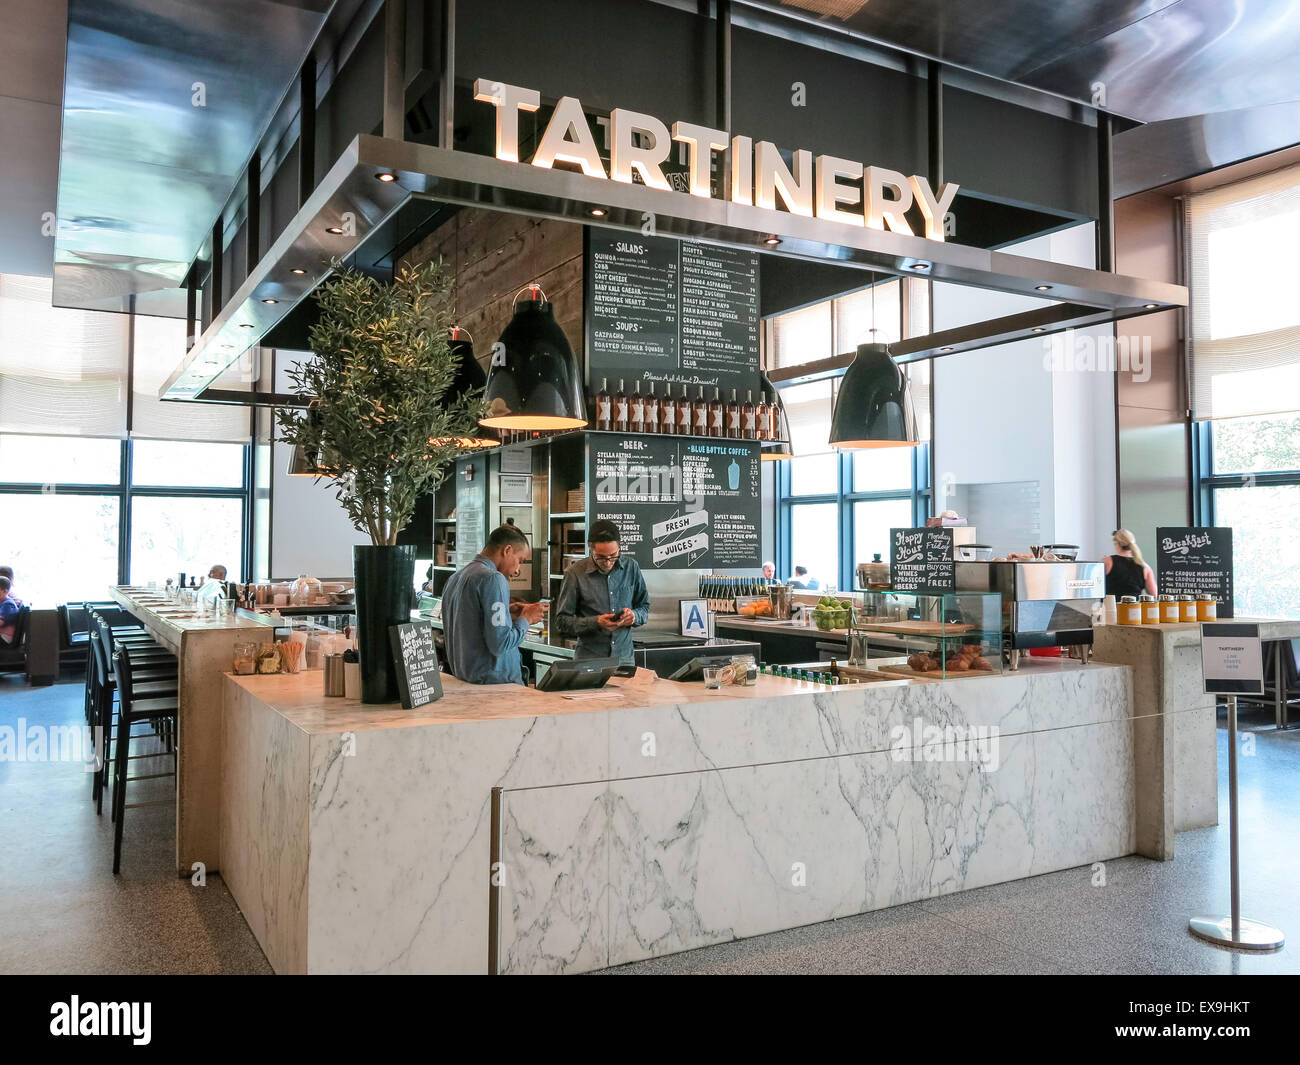 Food court at Valley View Mall in Roanoke, VA, USA Stock Photo - Alamy